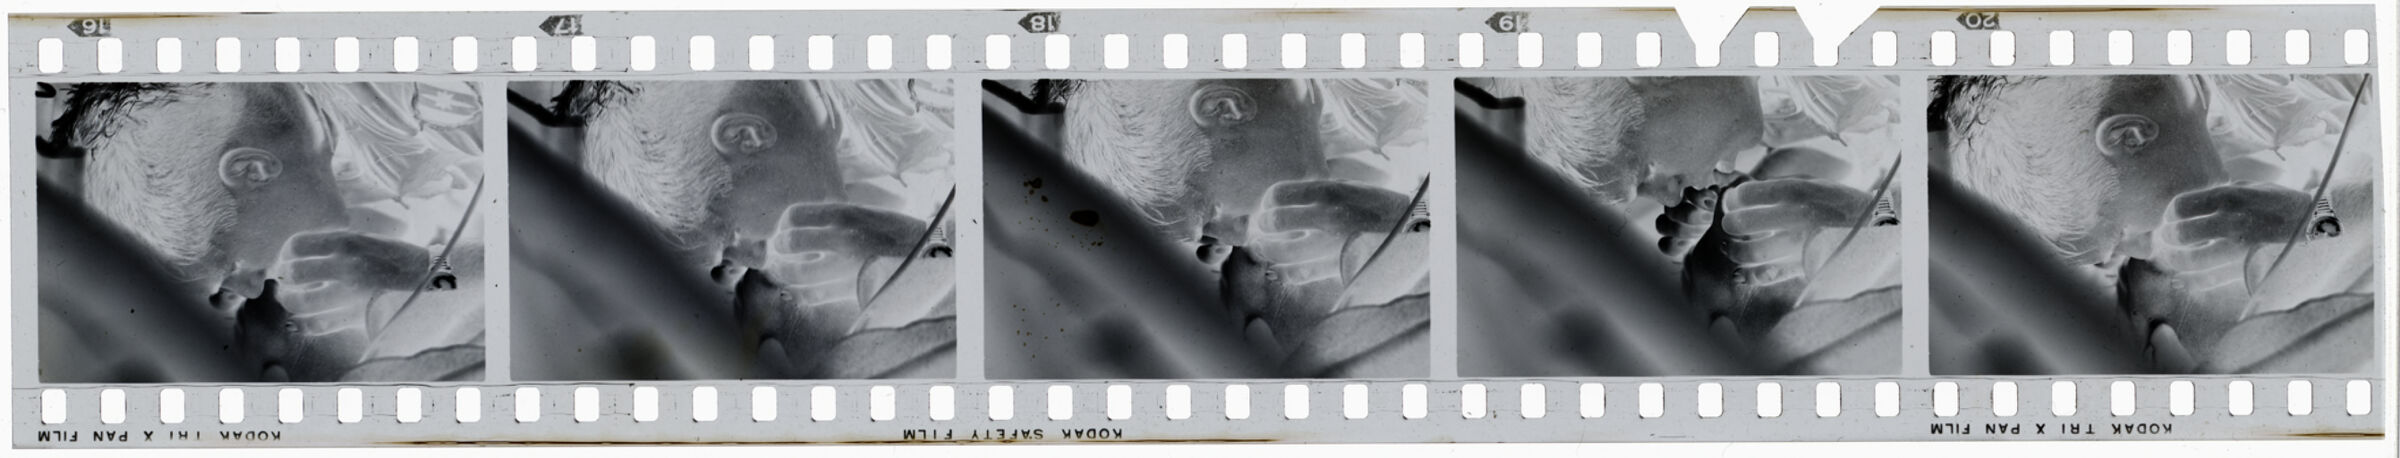 Untitled (Sp5 Herbert C. Donaldson Administering Mouth-To-Mouth Artificial Respiration During Medevac Mission, Vietnam)